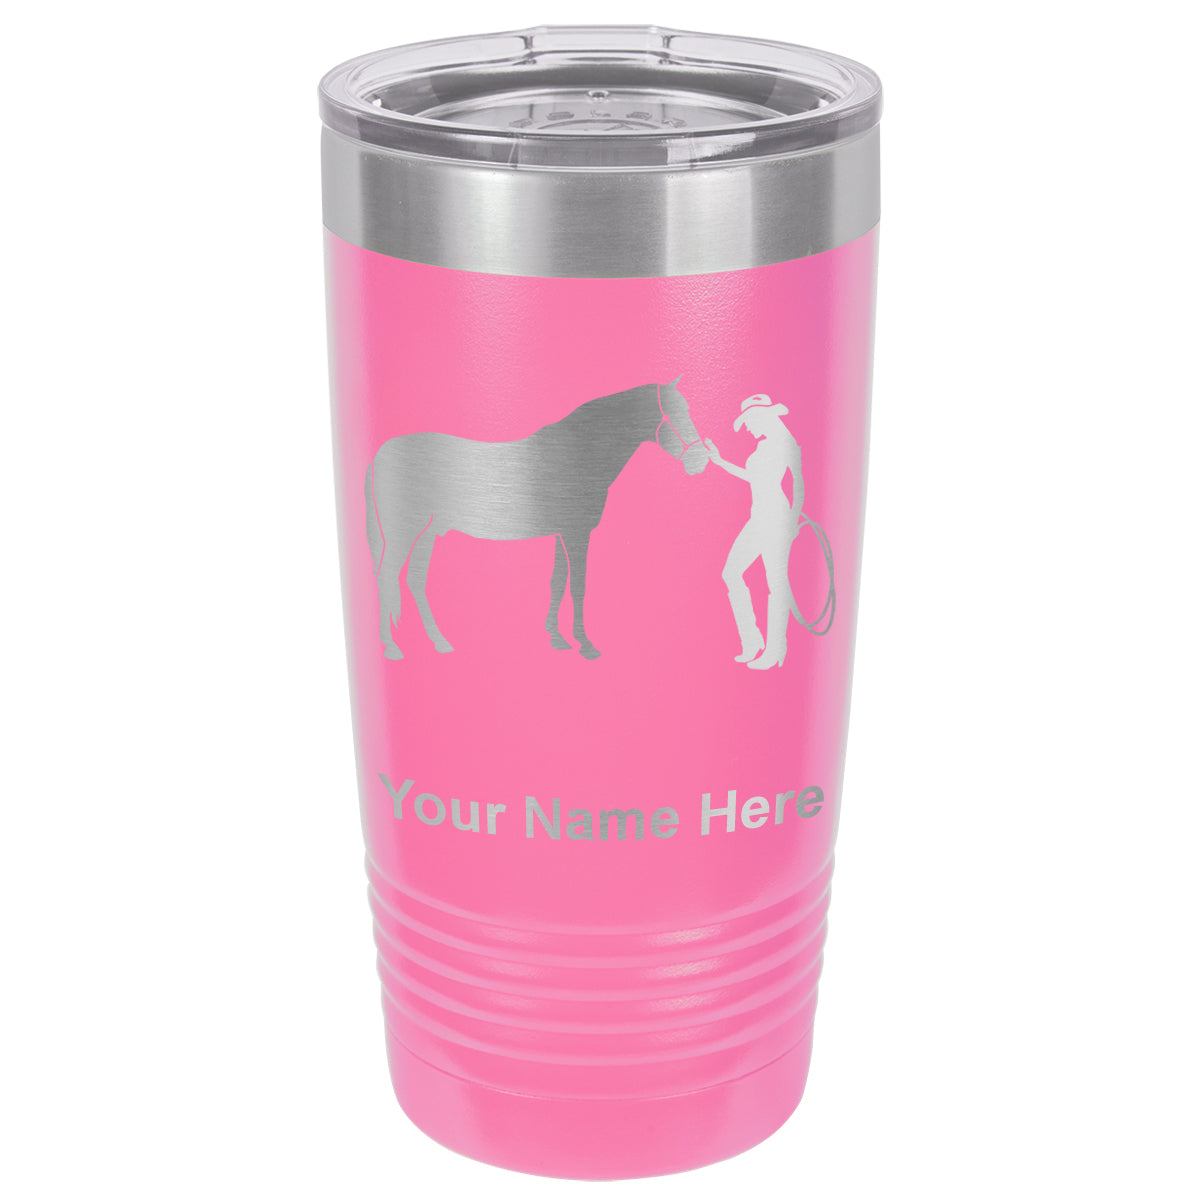 20oz Vacuum Insulated Tumbler Mug, Horse and Cowgirl, Personalized Engraving Included